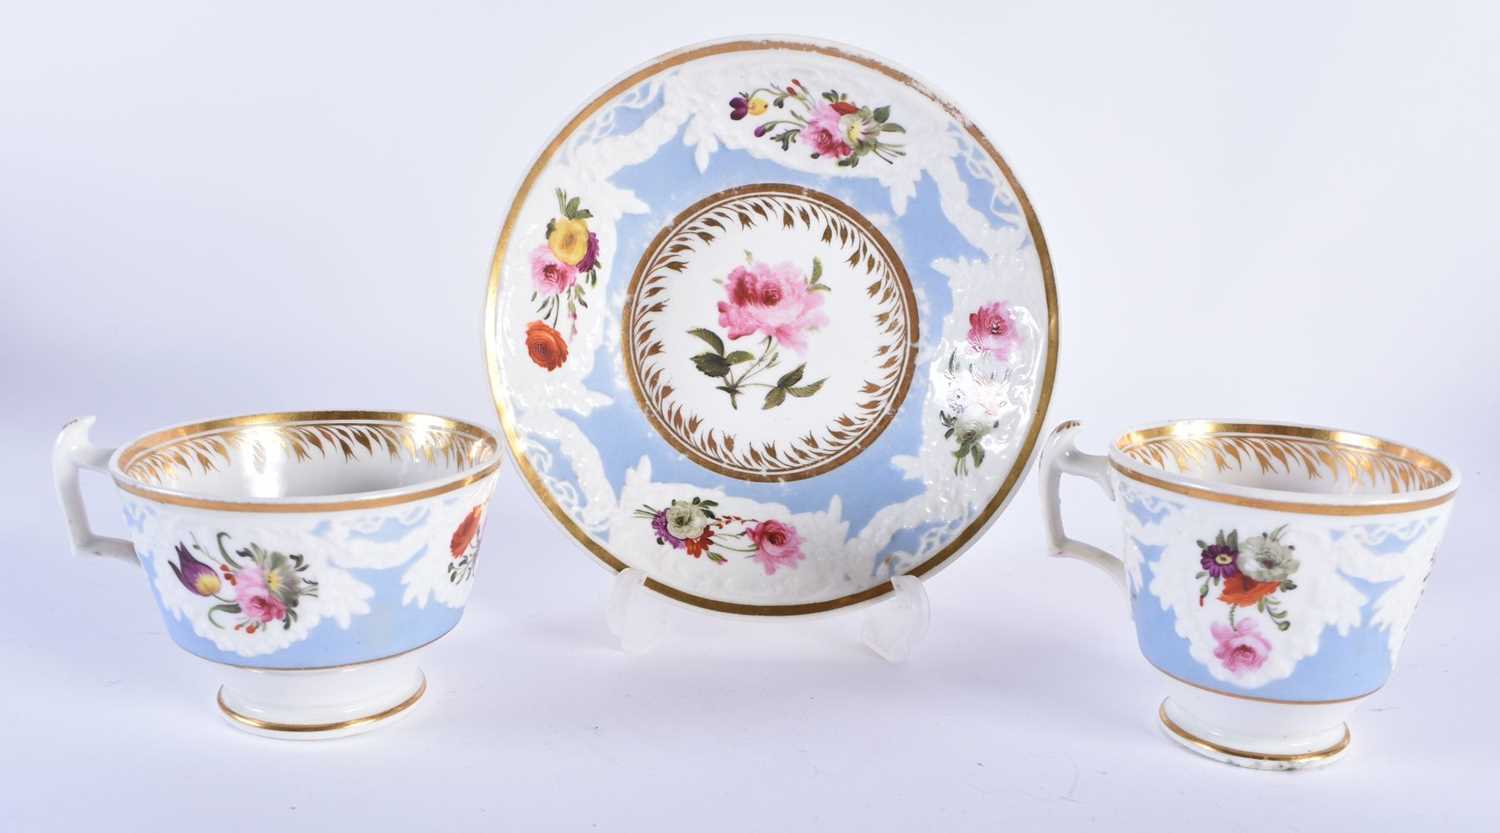 AN EARLY 19TH CENTURY CHAMBERLAINS WORCESTER PART TEASET painted with floral sprays, under a moulded - Image 2 of 36